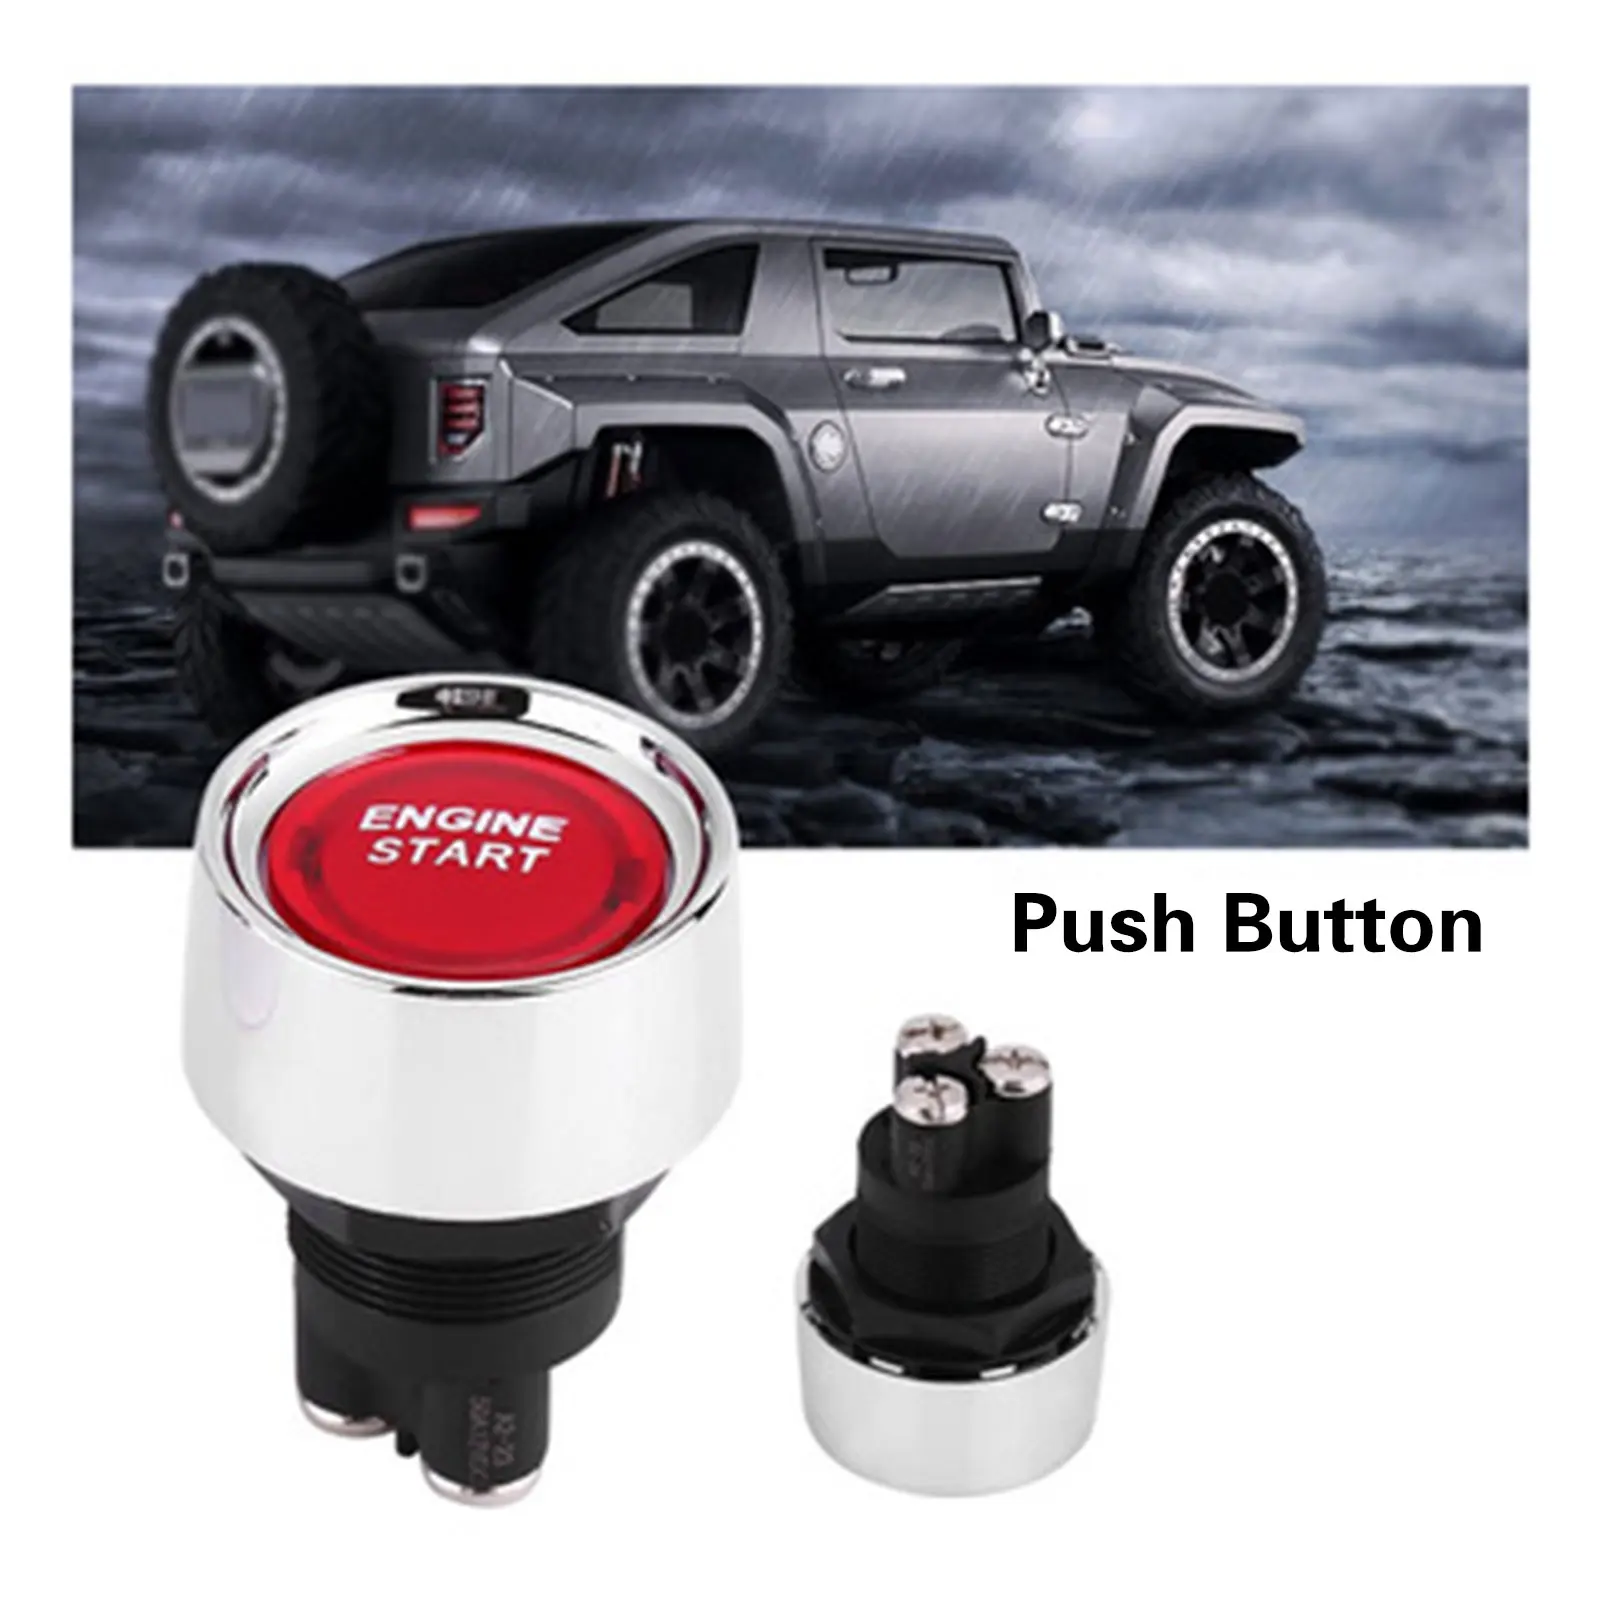 DC12-24V Car Engine Start Push Button Ignition Reset Switch Off-ON Blue 